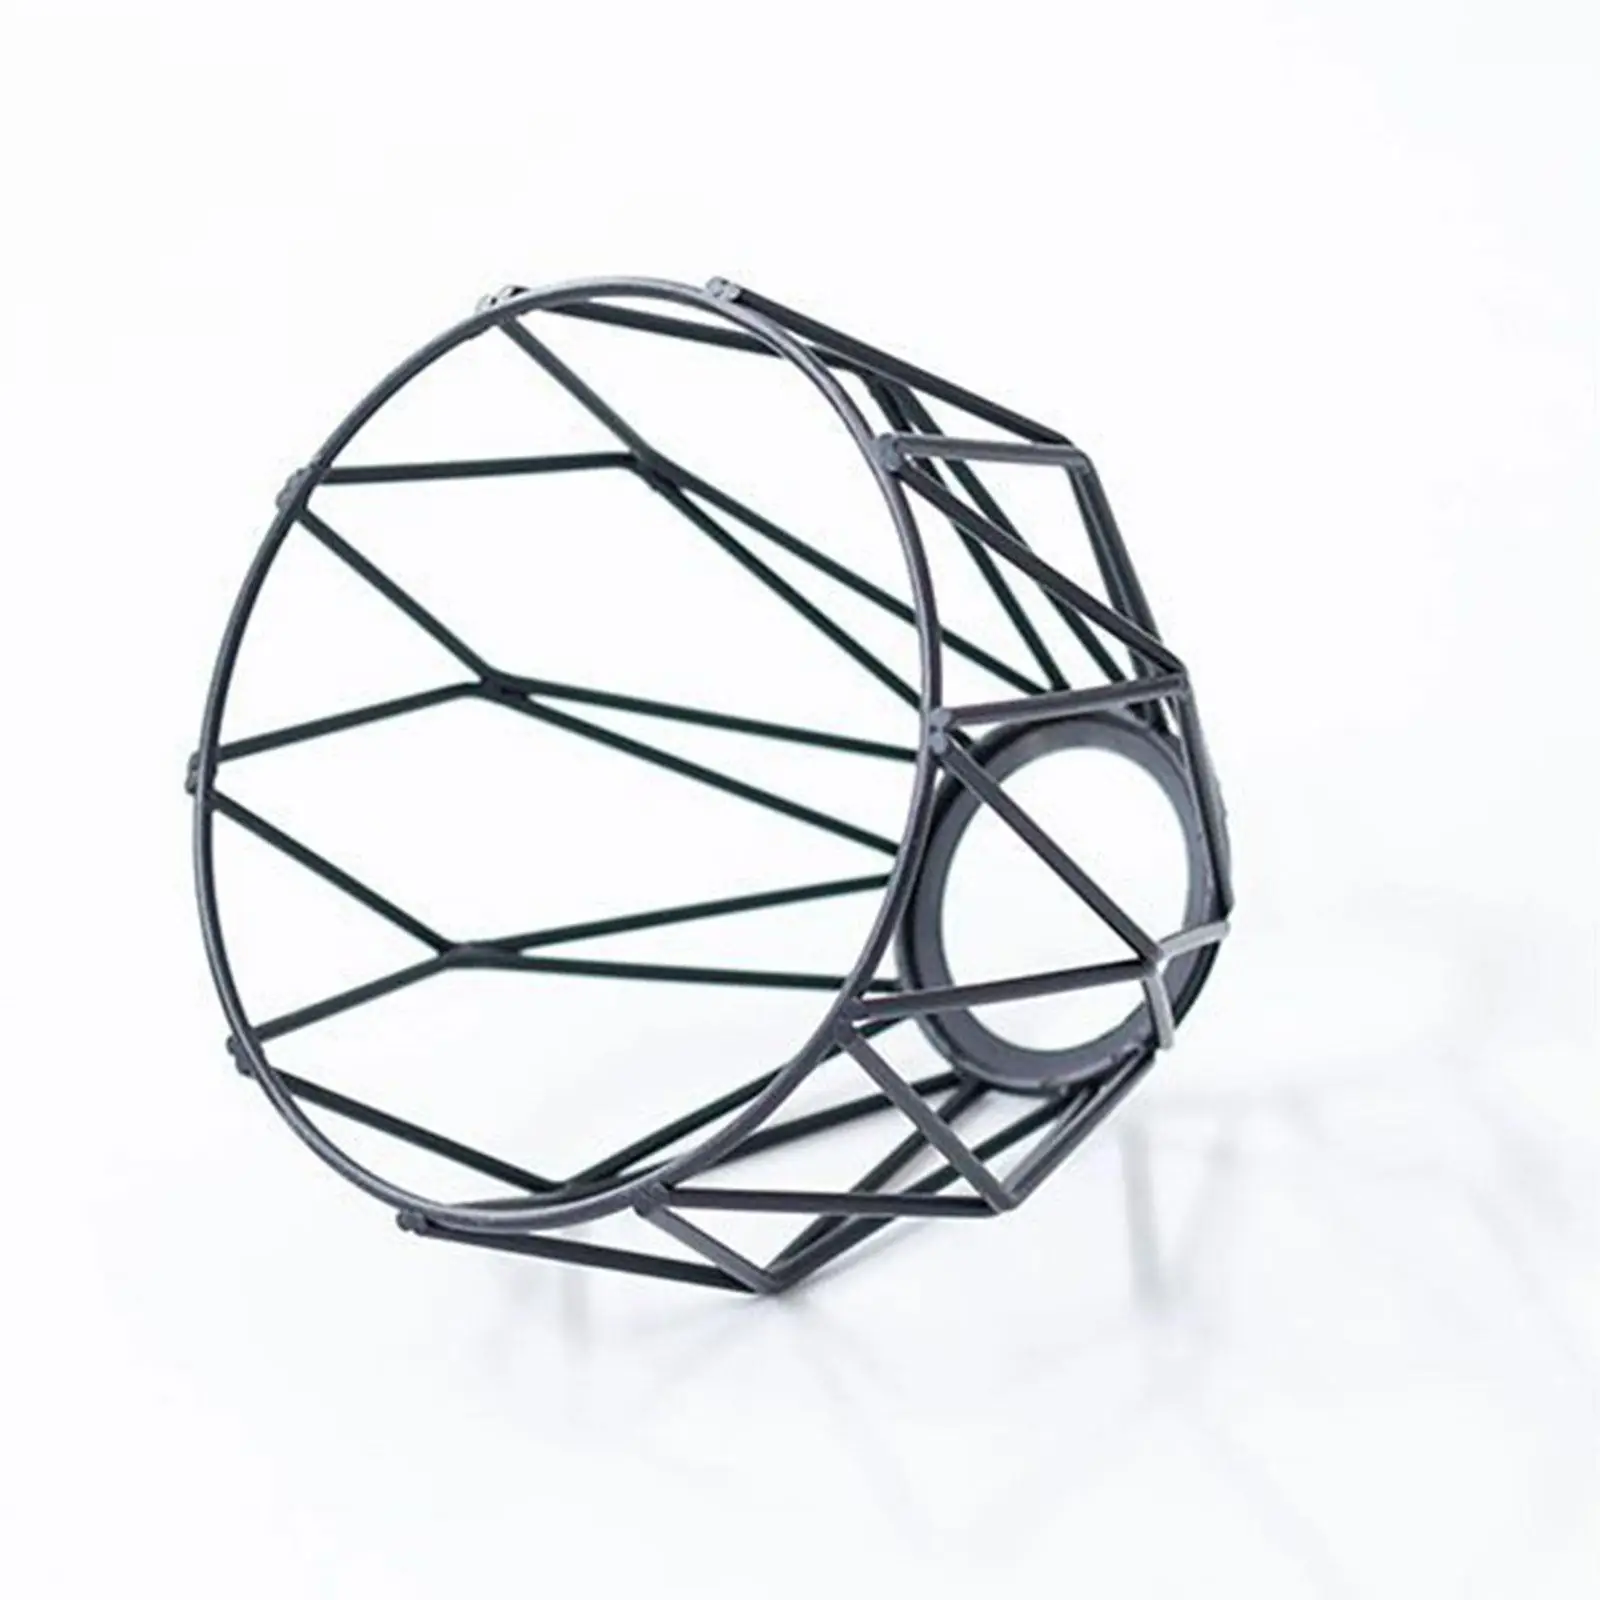 Wire Cage Lampshade Industrial Metal Cage Home Decoration DIY Ceiling Cover